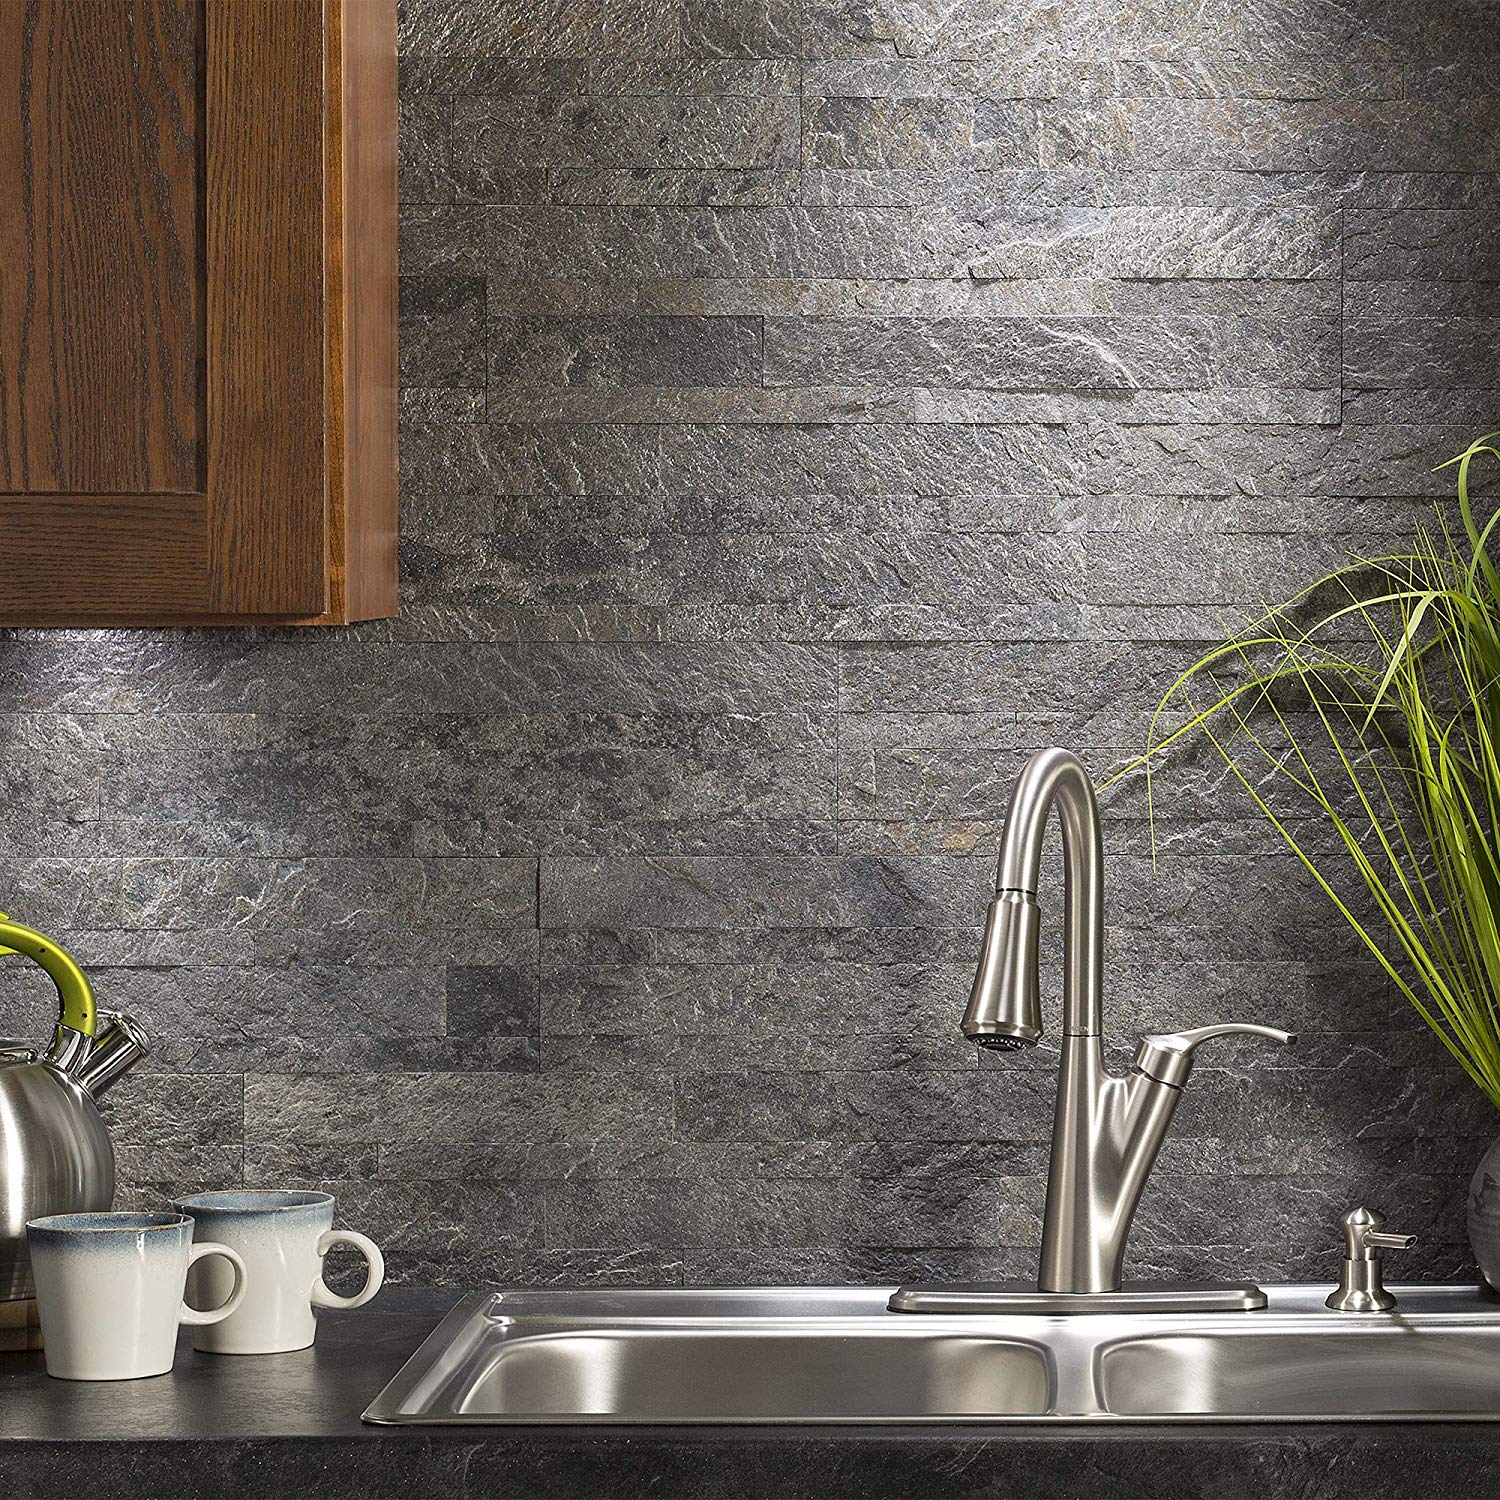 9 DIY Peel-And-Stick Tiles To Quickly Take Your Backsplash From Meh To ...